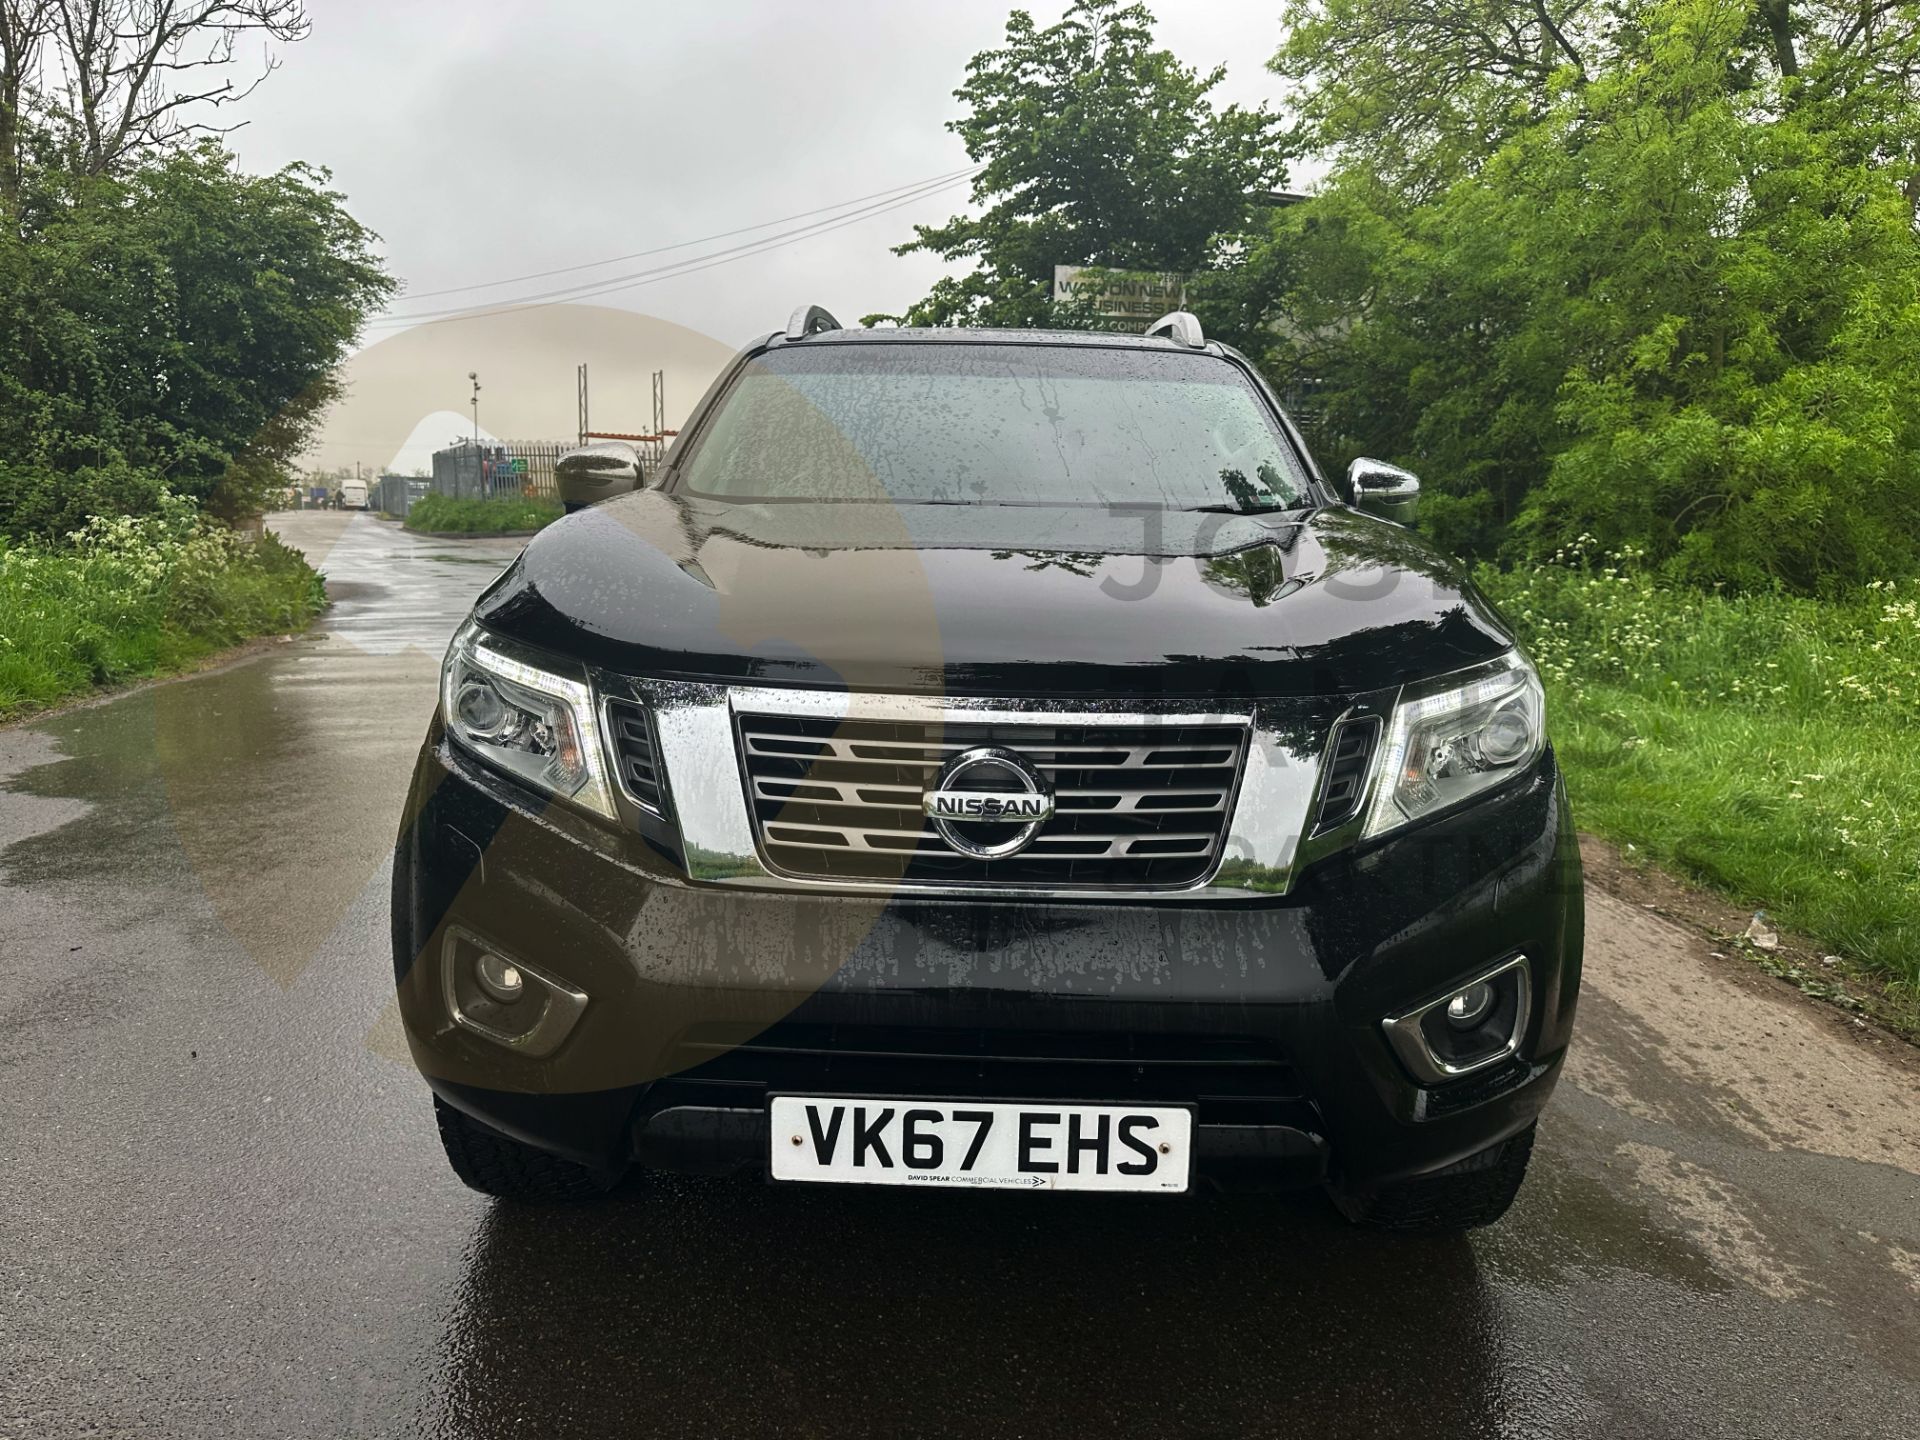 (ON SALE) NISSAN NAVARA *TREK-1 EDITION* DOUBLE CAB PICK-UP (2018 - EURO 6) 2.3 DCI - AUTOMATIC - Image 4 of 52